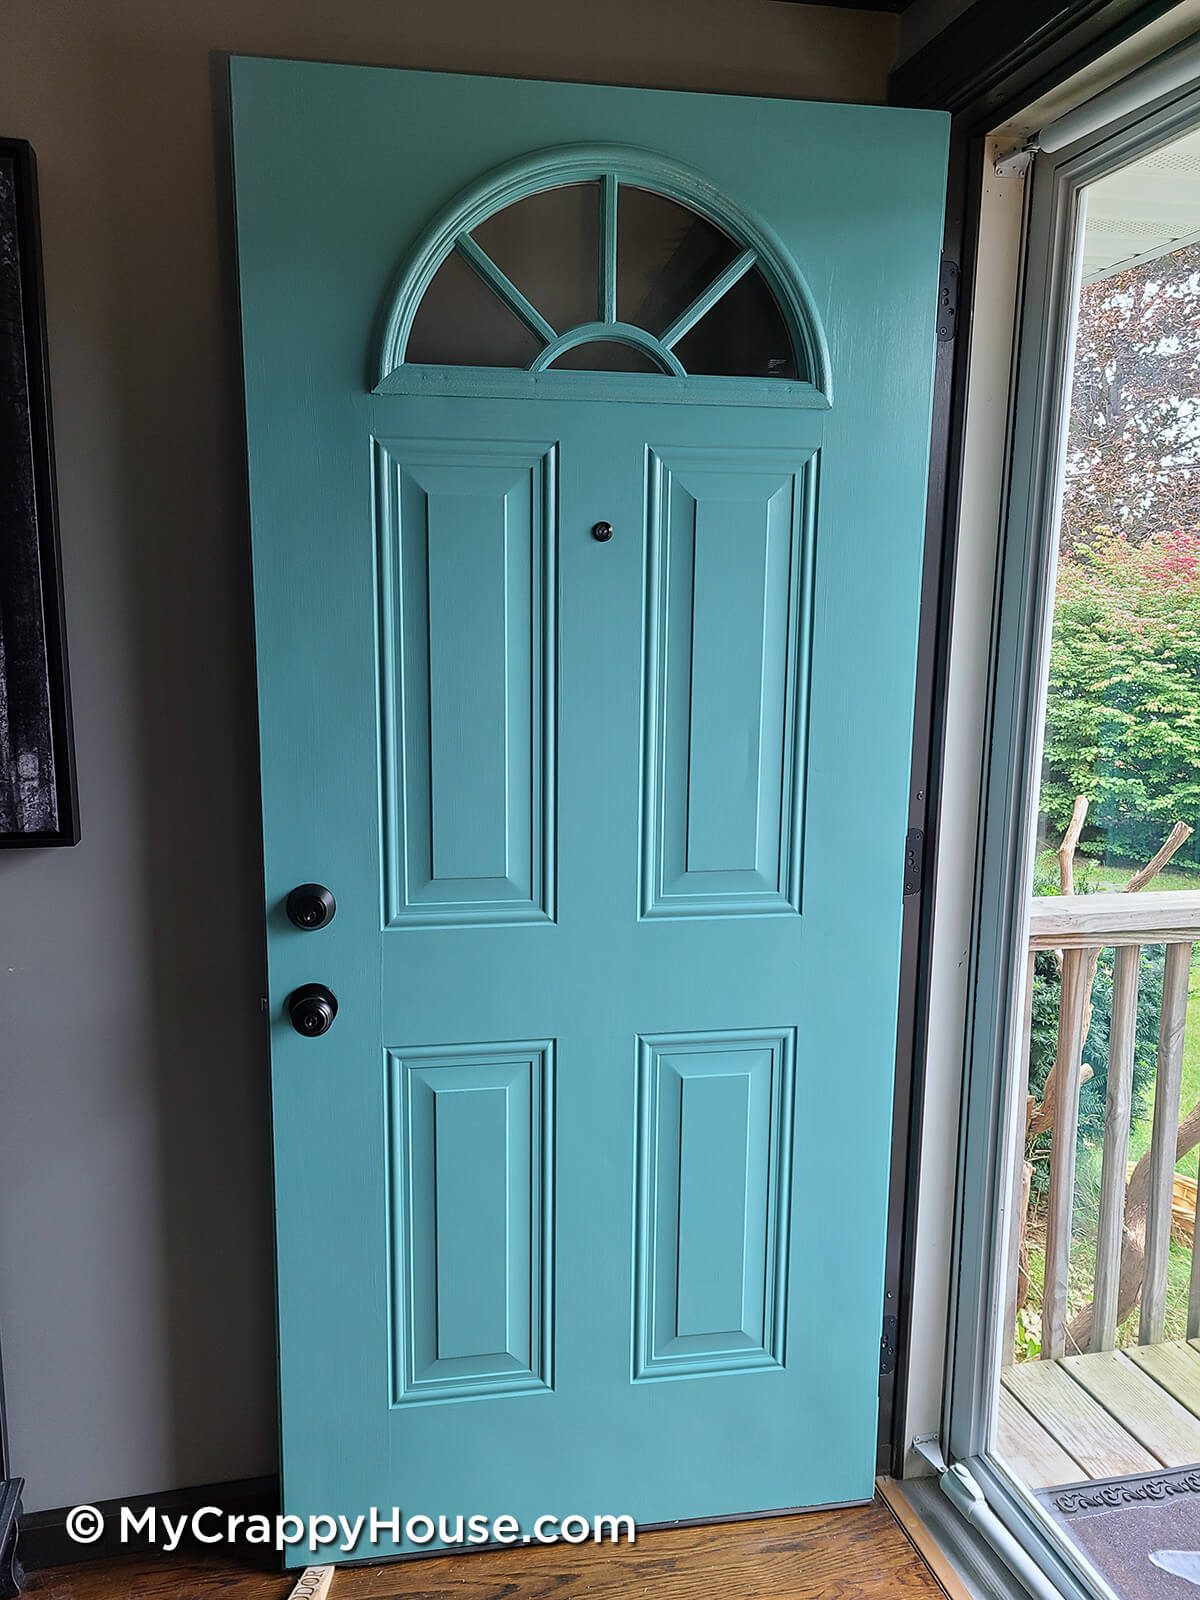 Final result showing how to paint a panel door with a brush. Aqua door with black knob and peephole